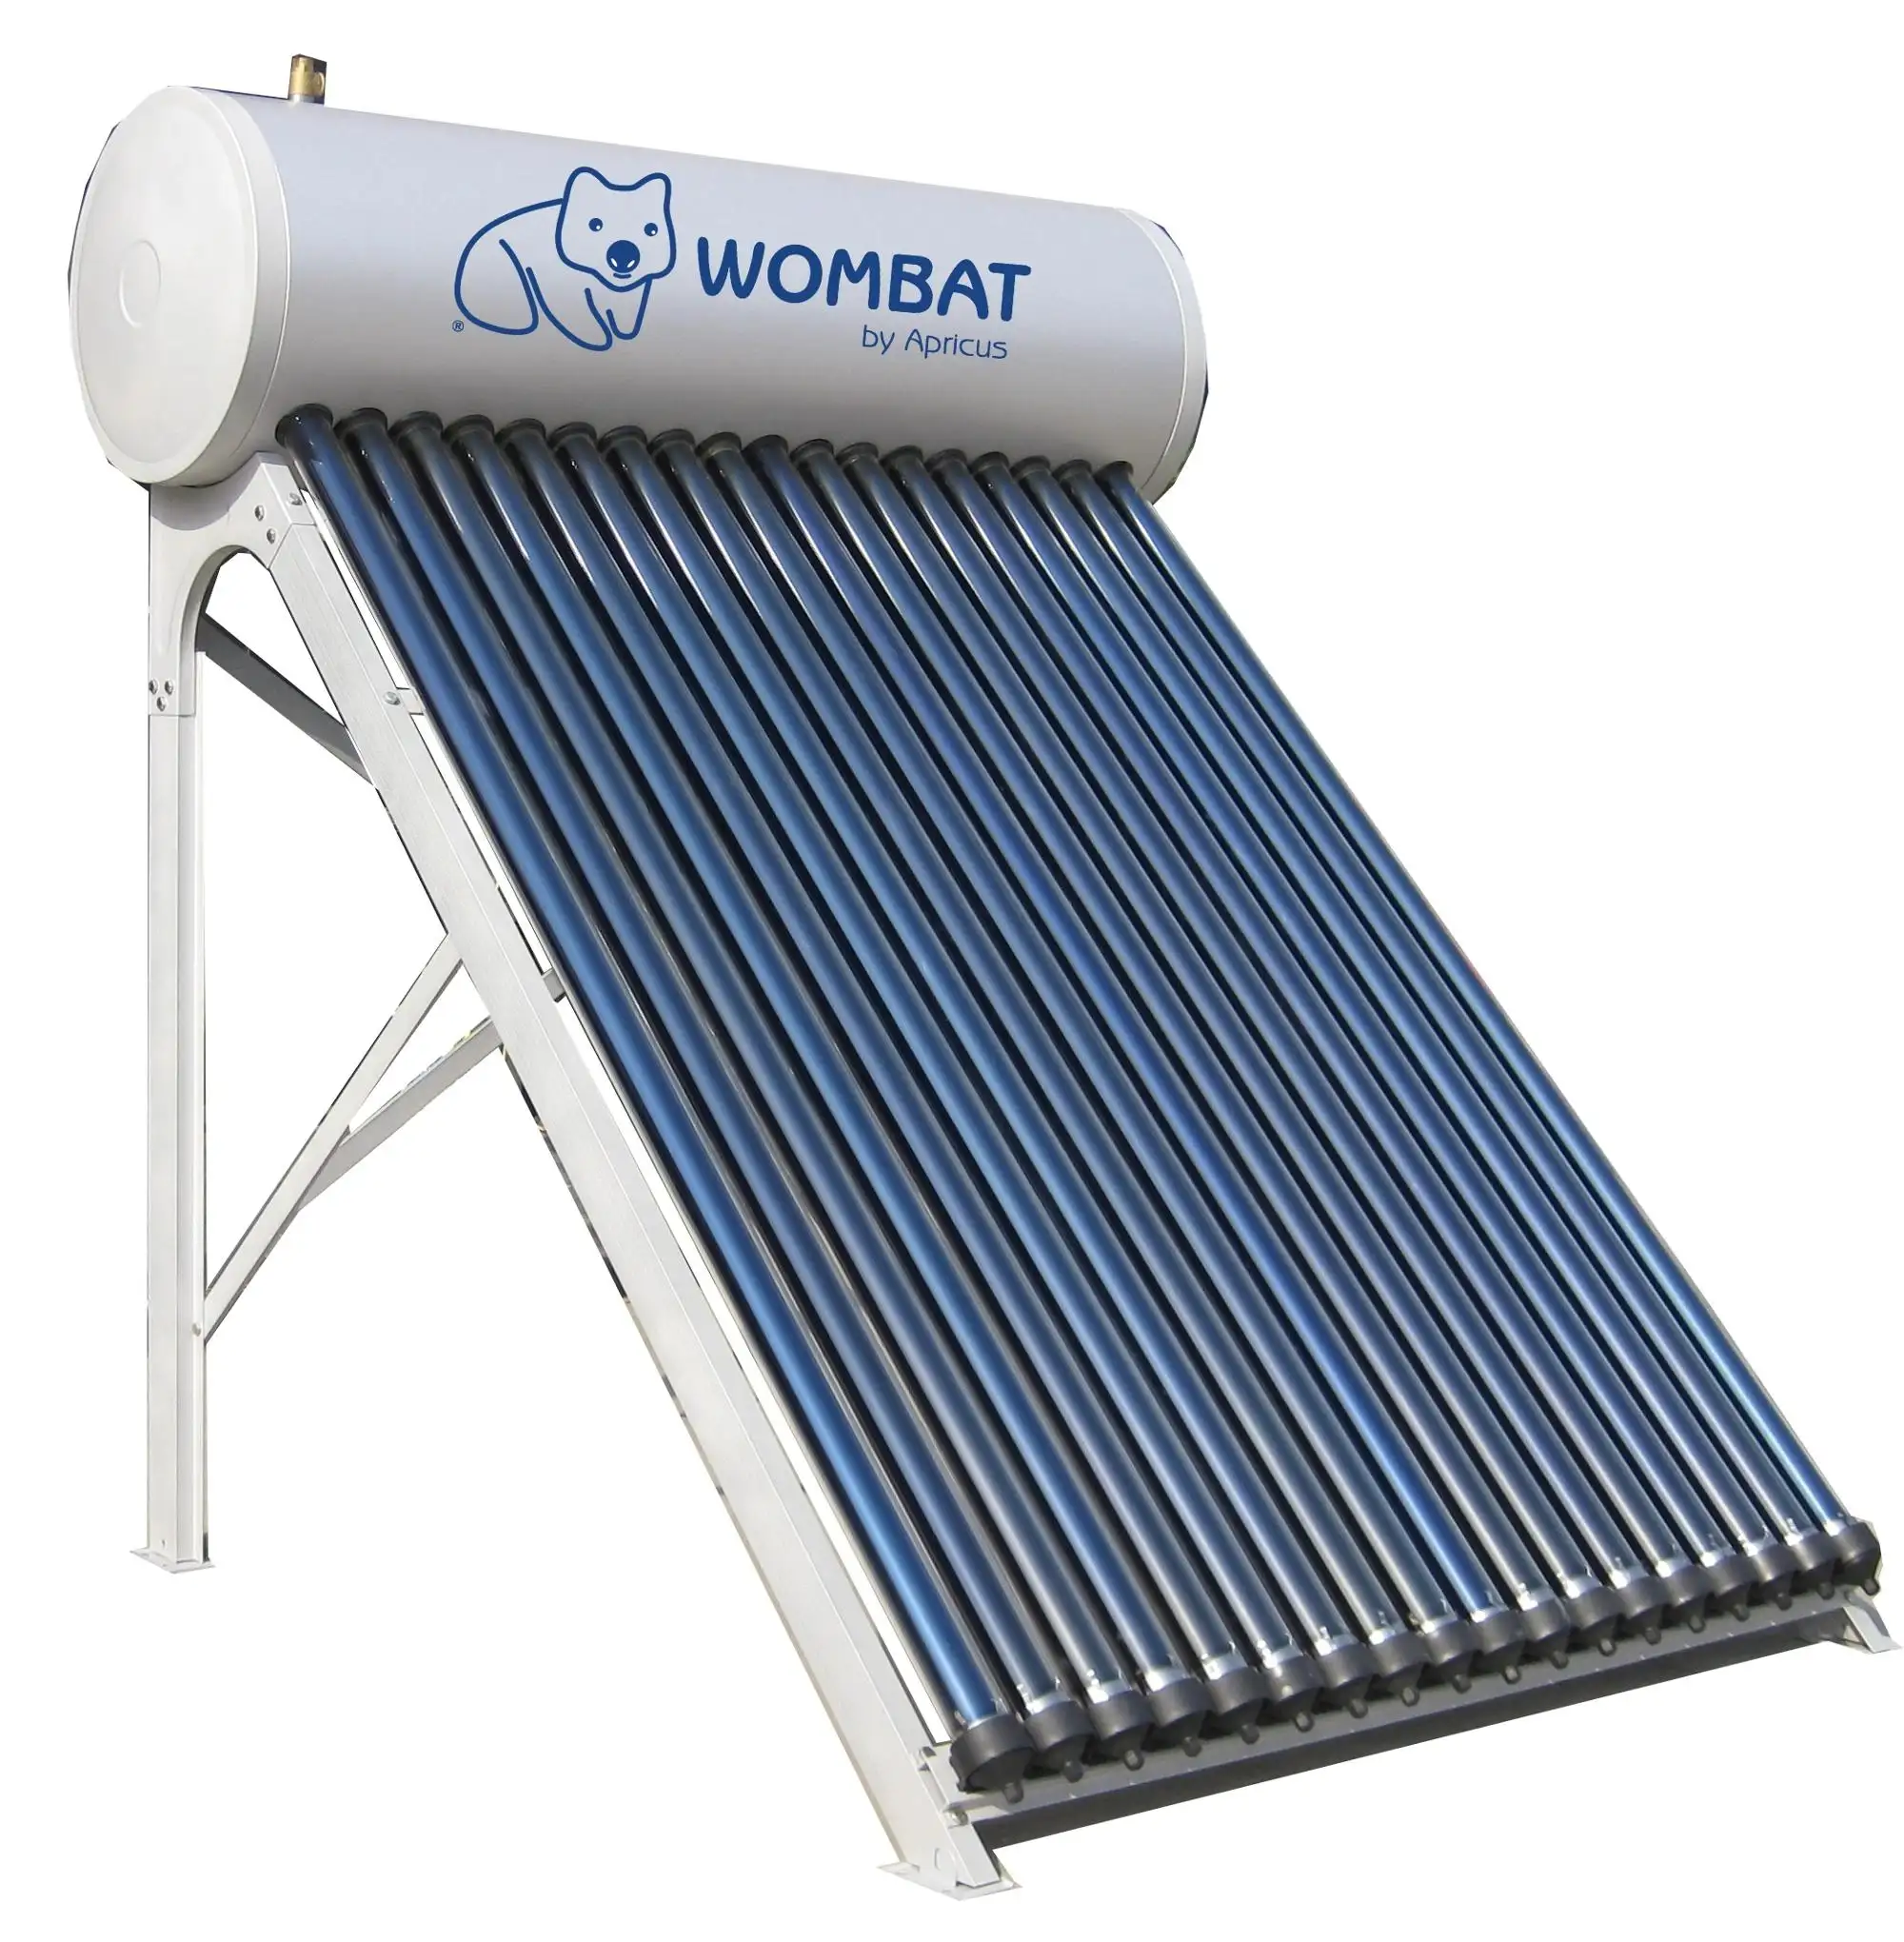 China manufactured thermosyphon solar water heater 200L